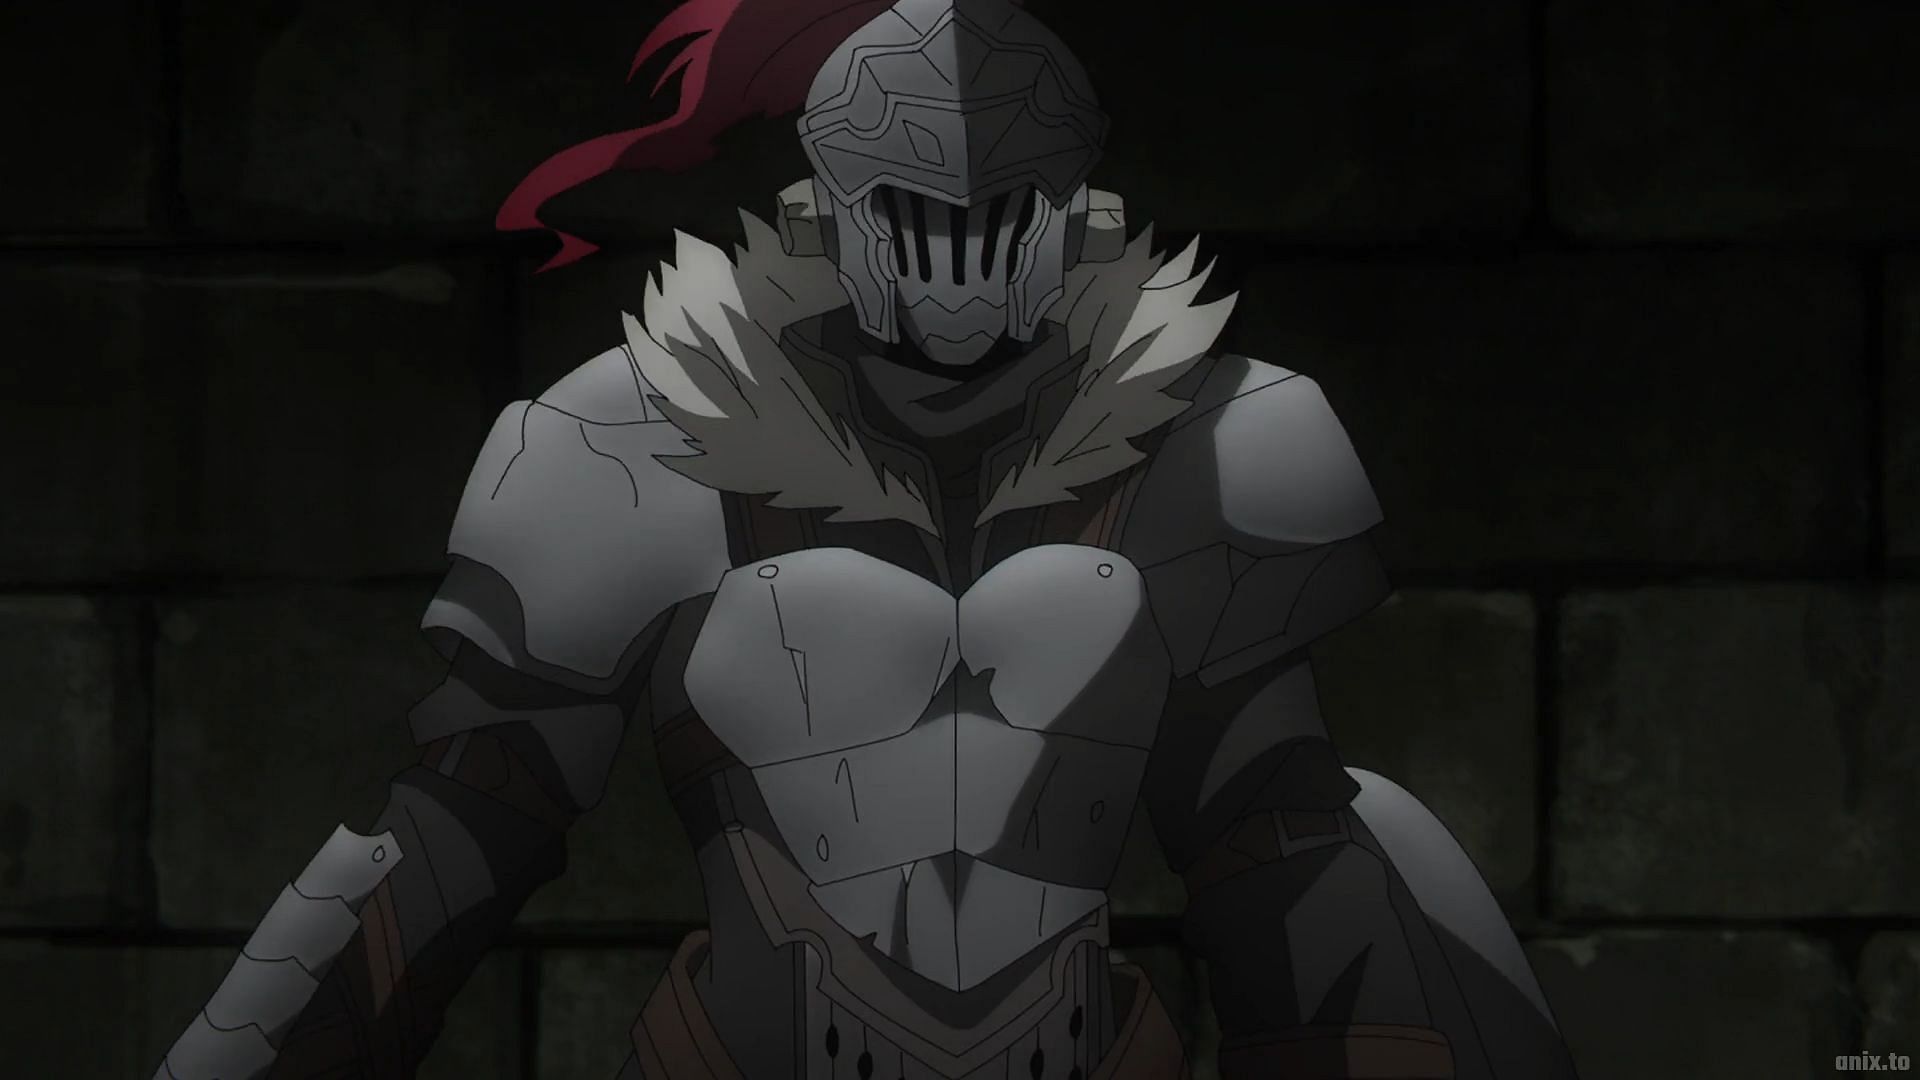 goblin slayer: Goblin Slayer Season 2 English dub confirmed; Know release  date, cast and more - The Economic Times